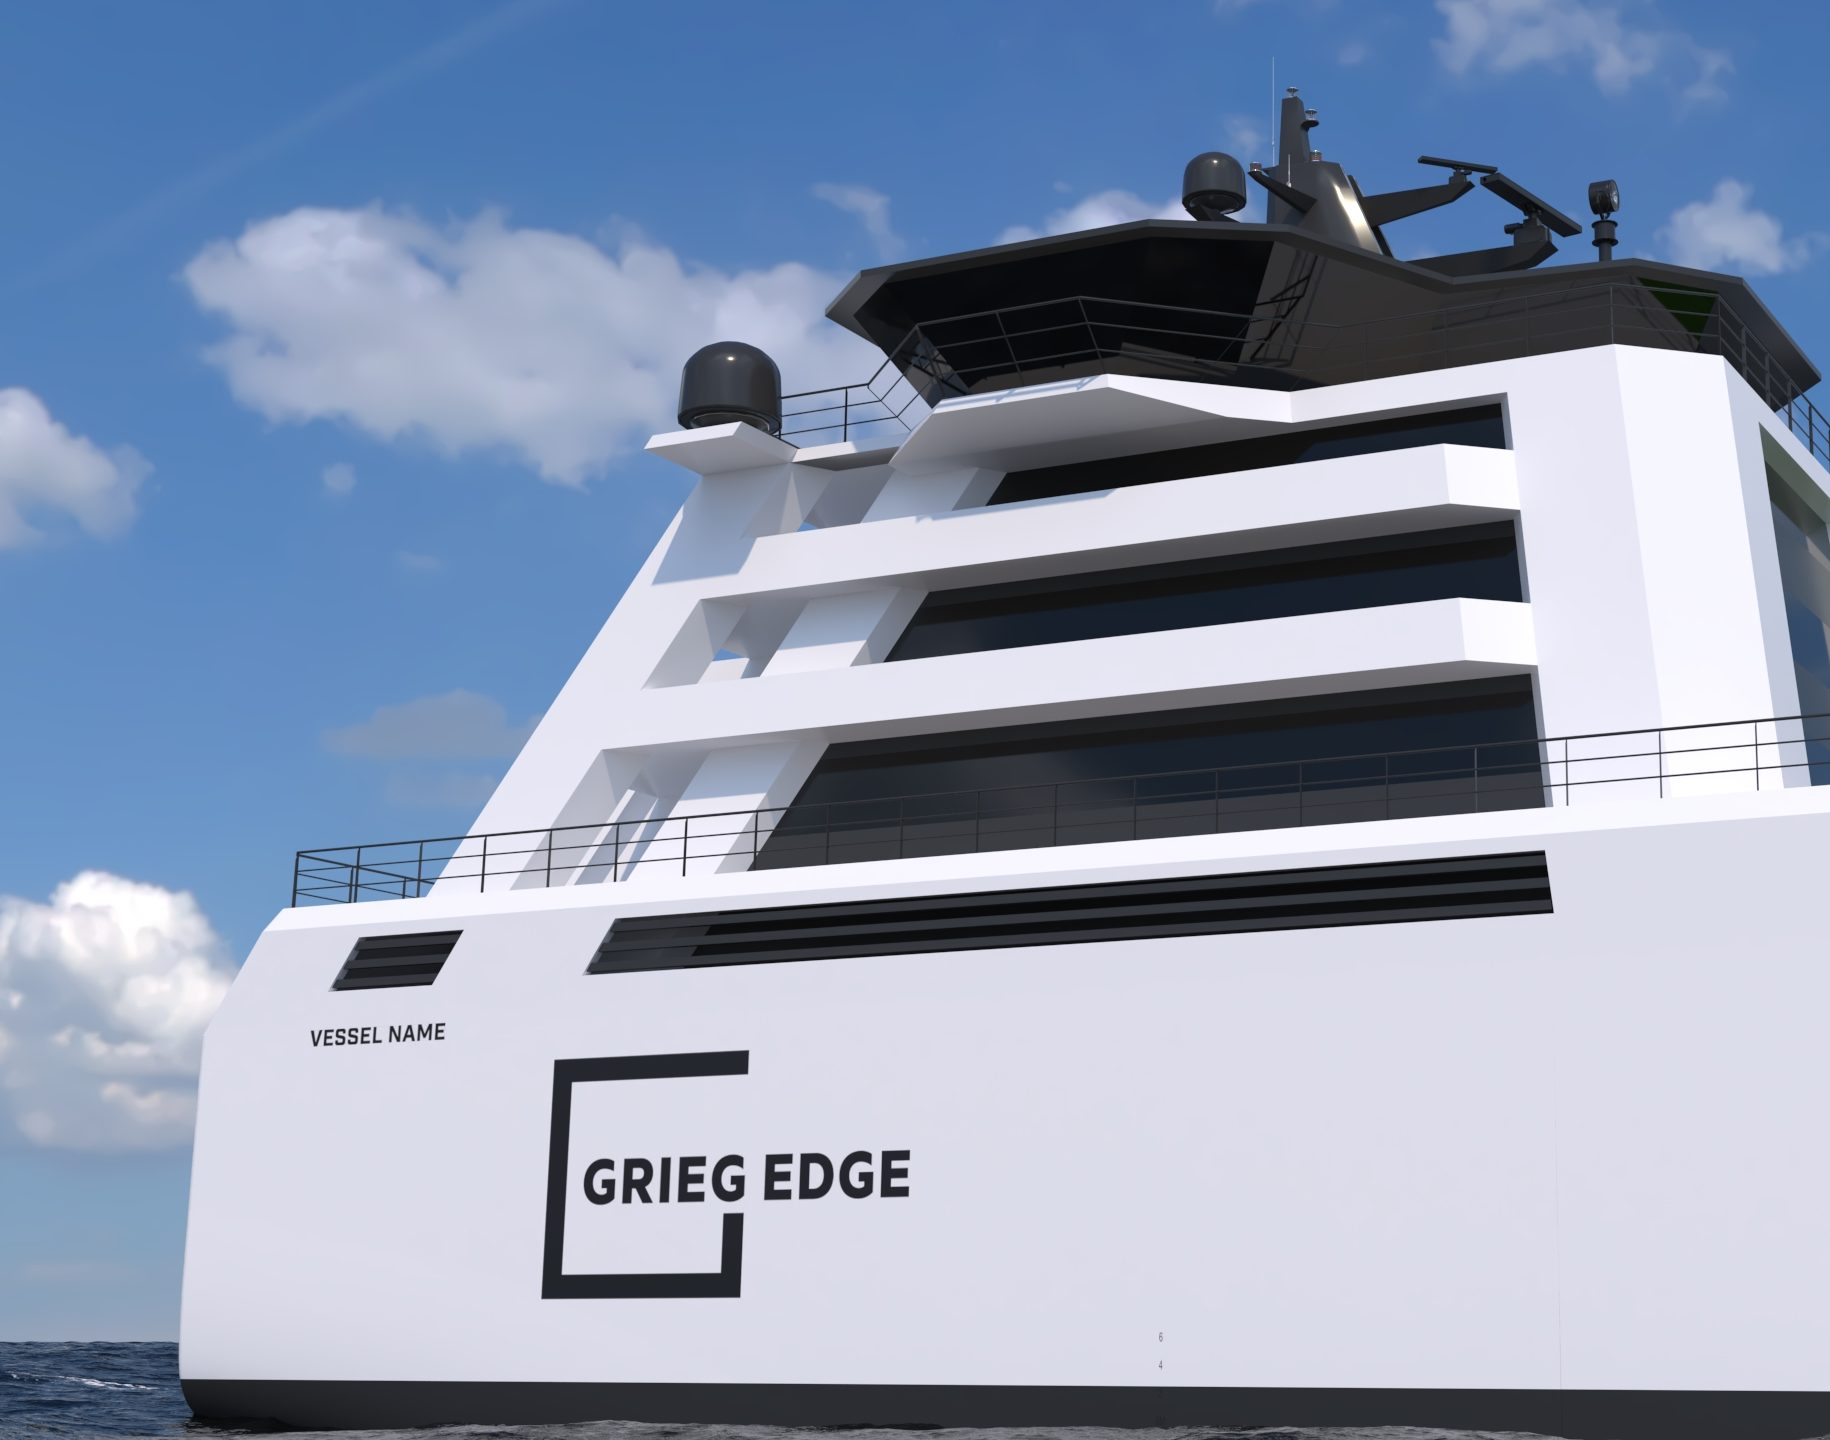 Grieg Edge ship from behind with logo.